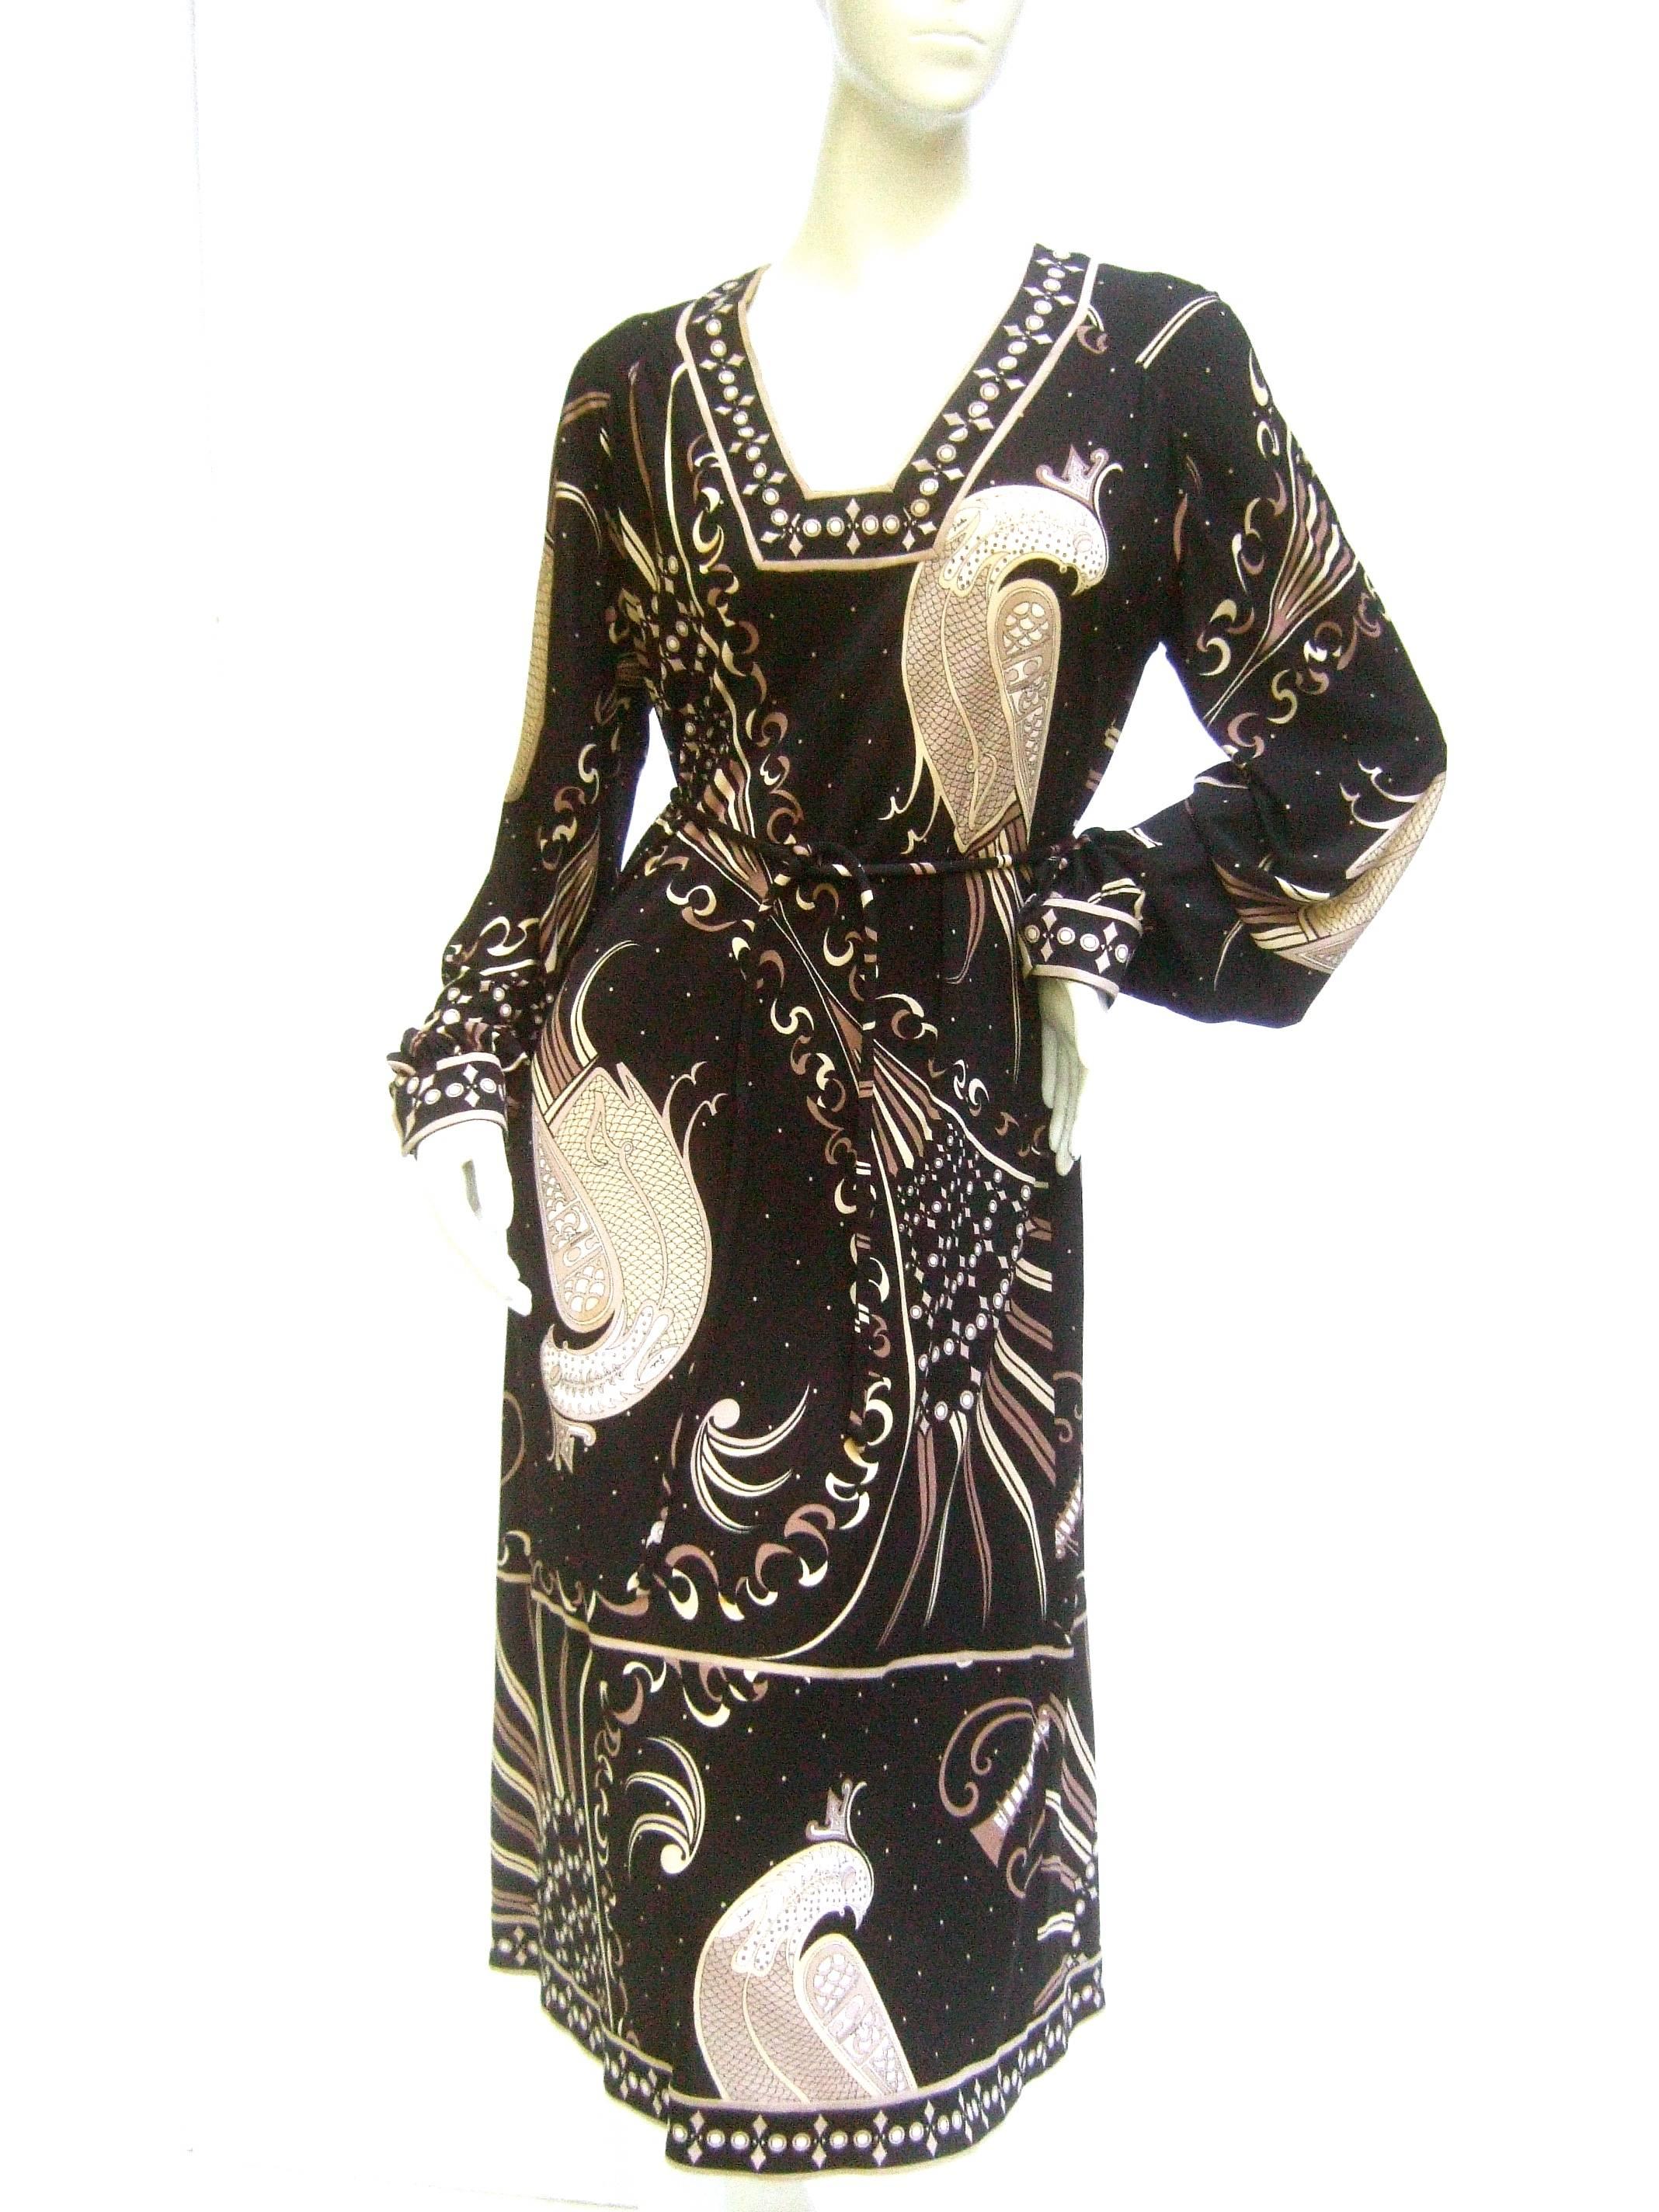 Emilio Pucci rare silk jersey birds of paradise dress 
The Italian silk jersey dress is illustrated with
a series of stylized birds with sinuous plumage 

The elegant birds graphics are illuminated 
against a stark black jersey silk